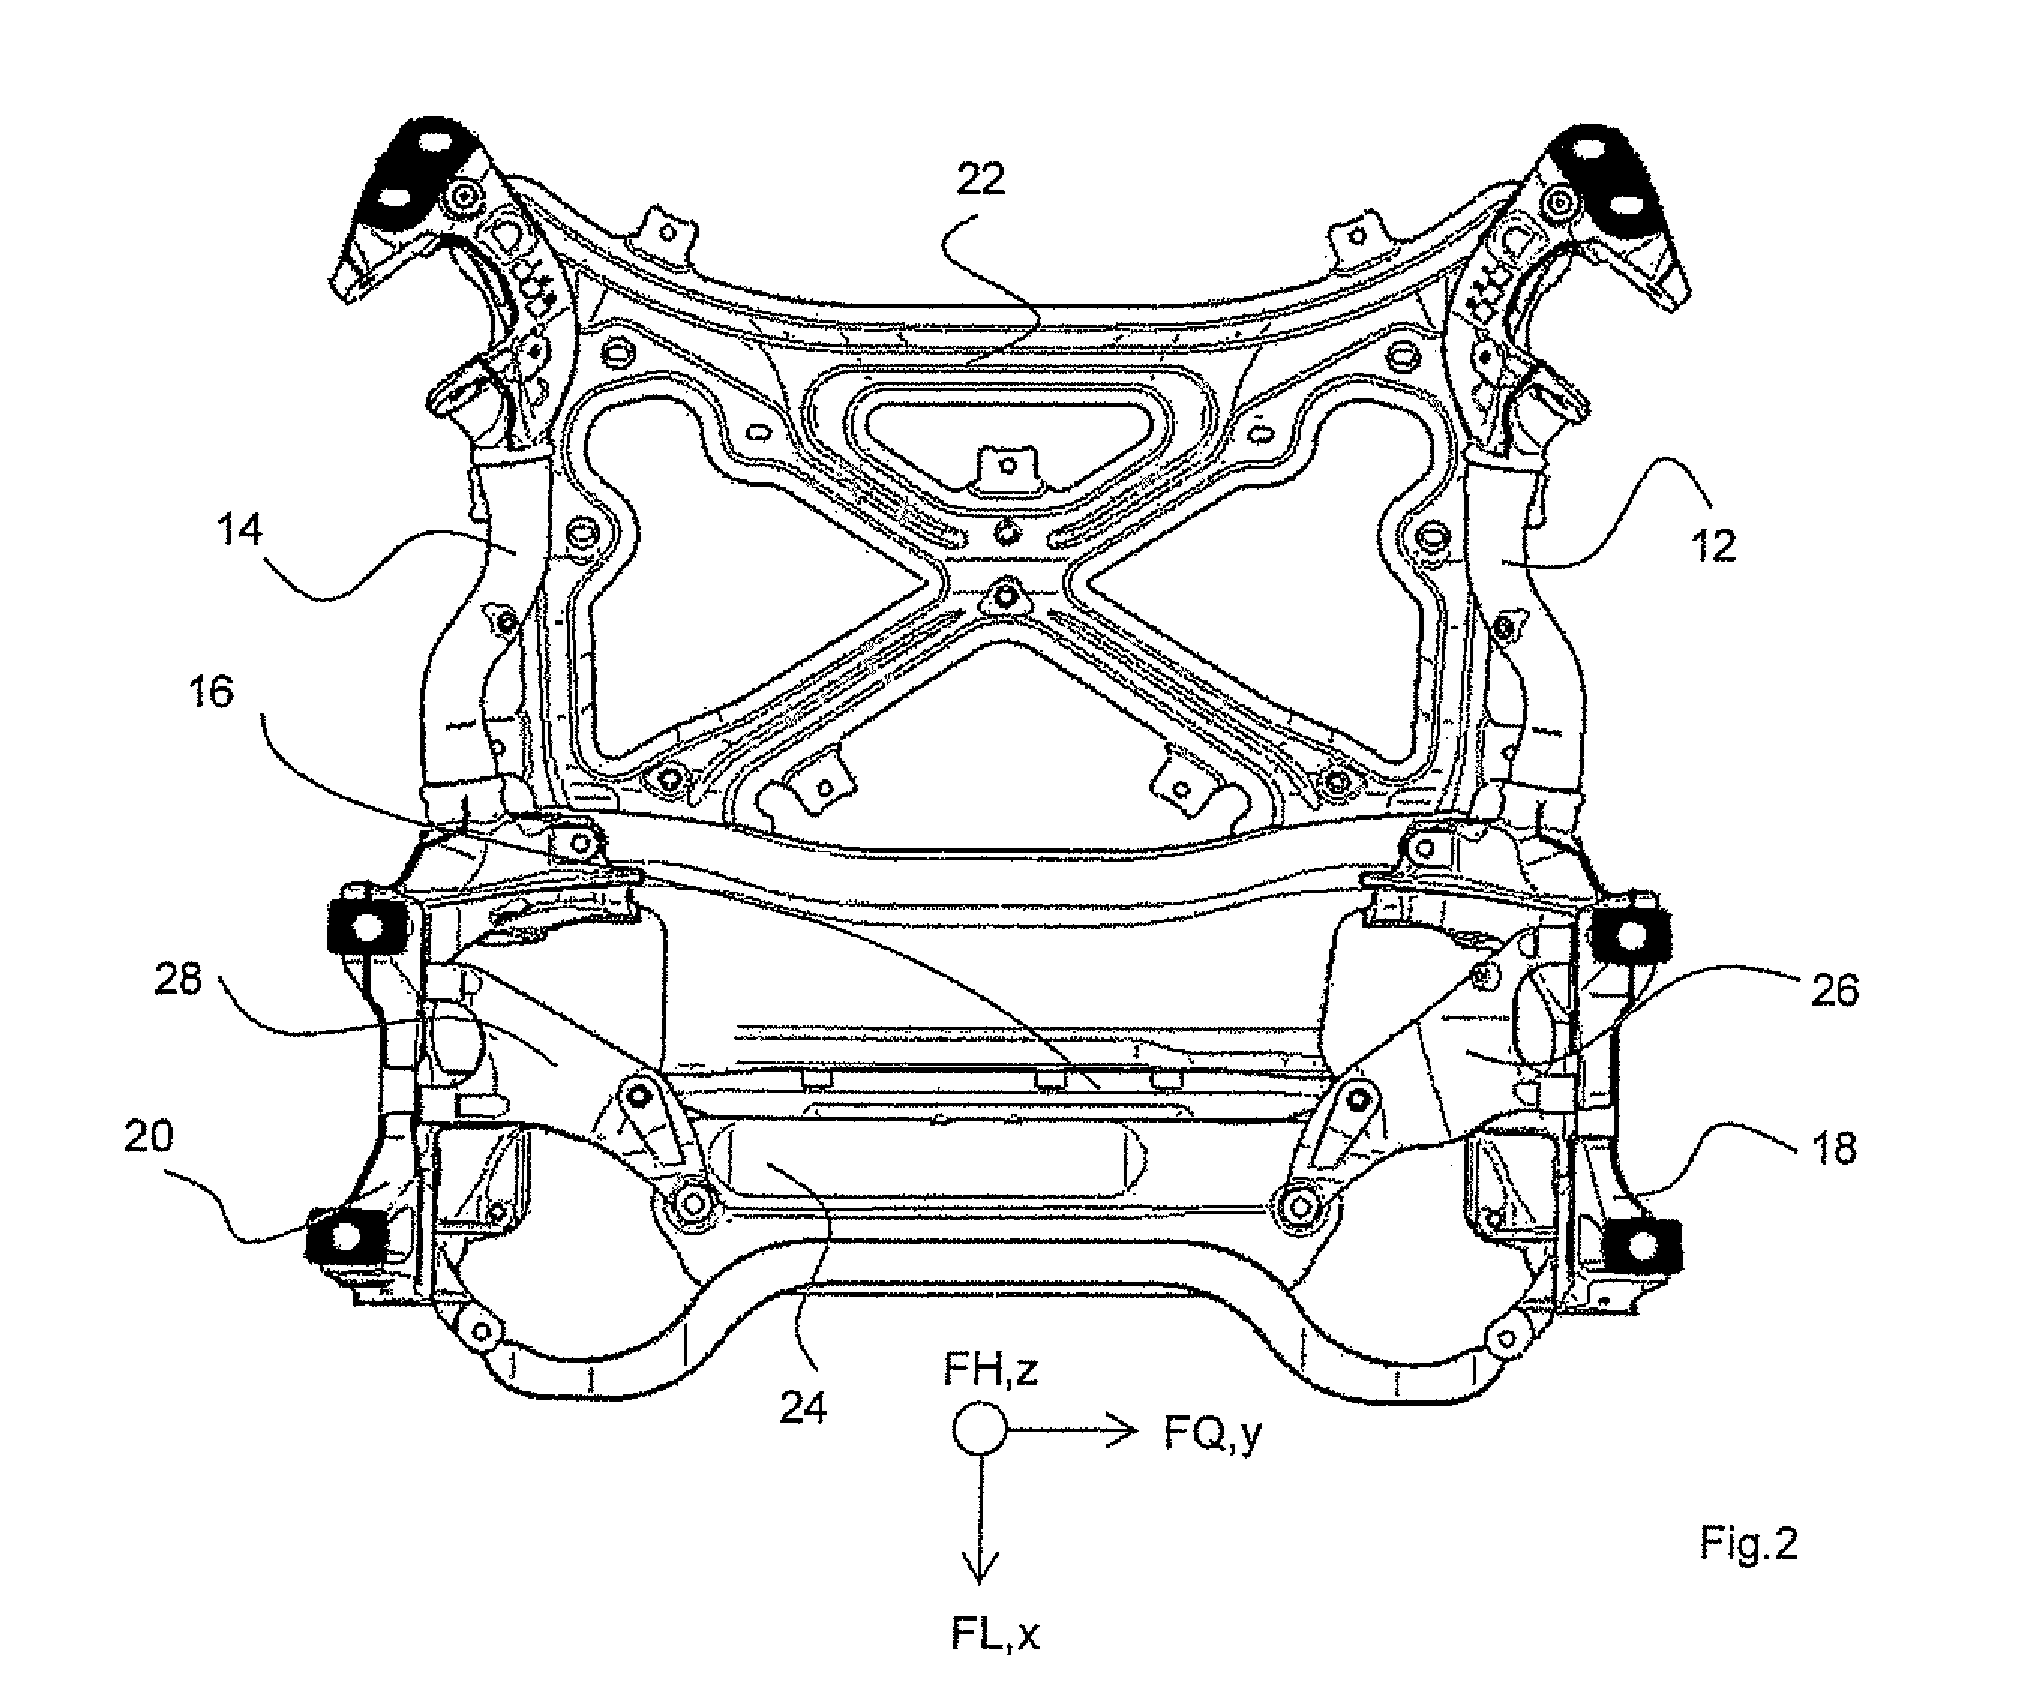 Subframe for a motor vehicle